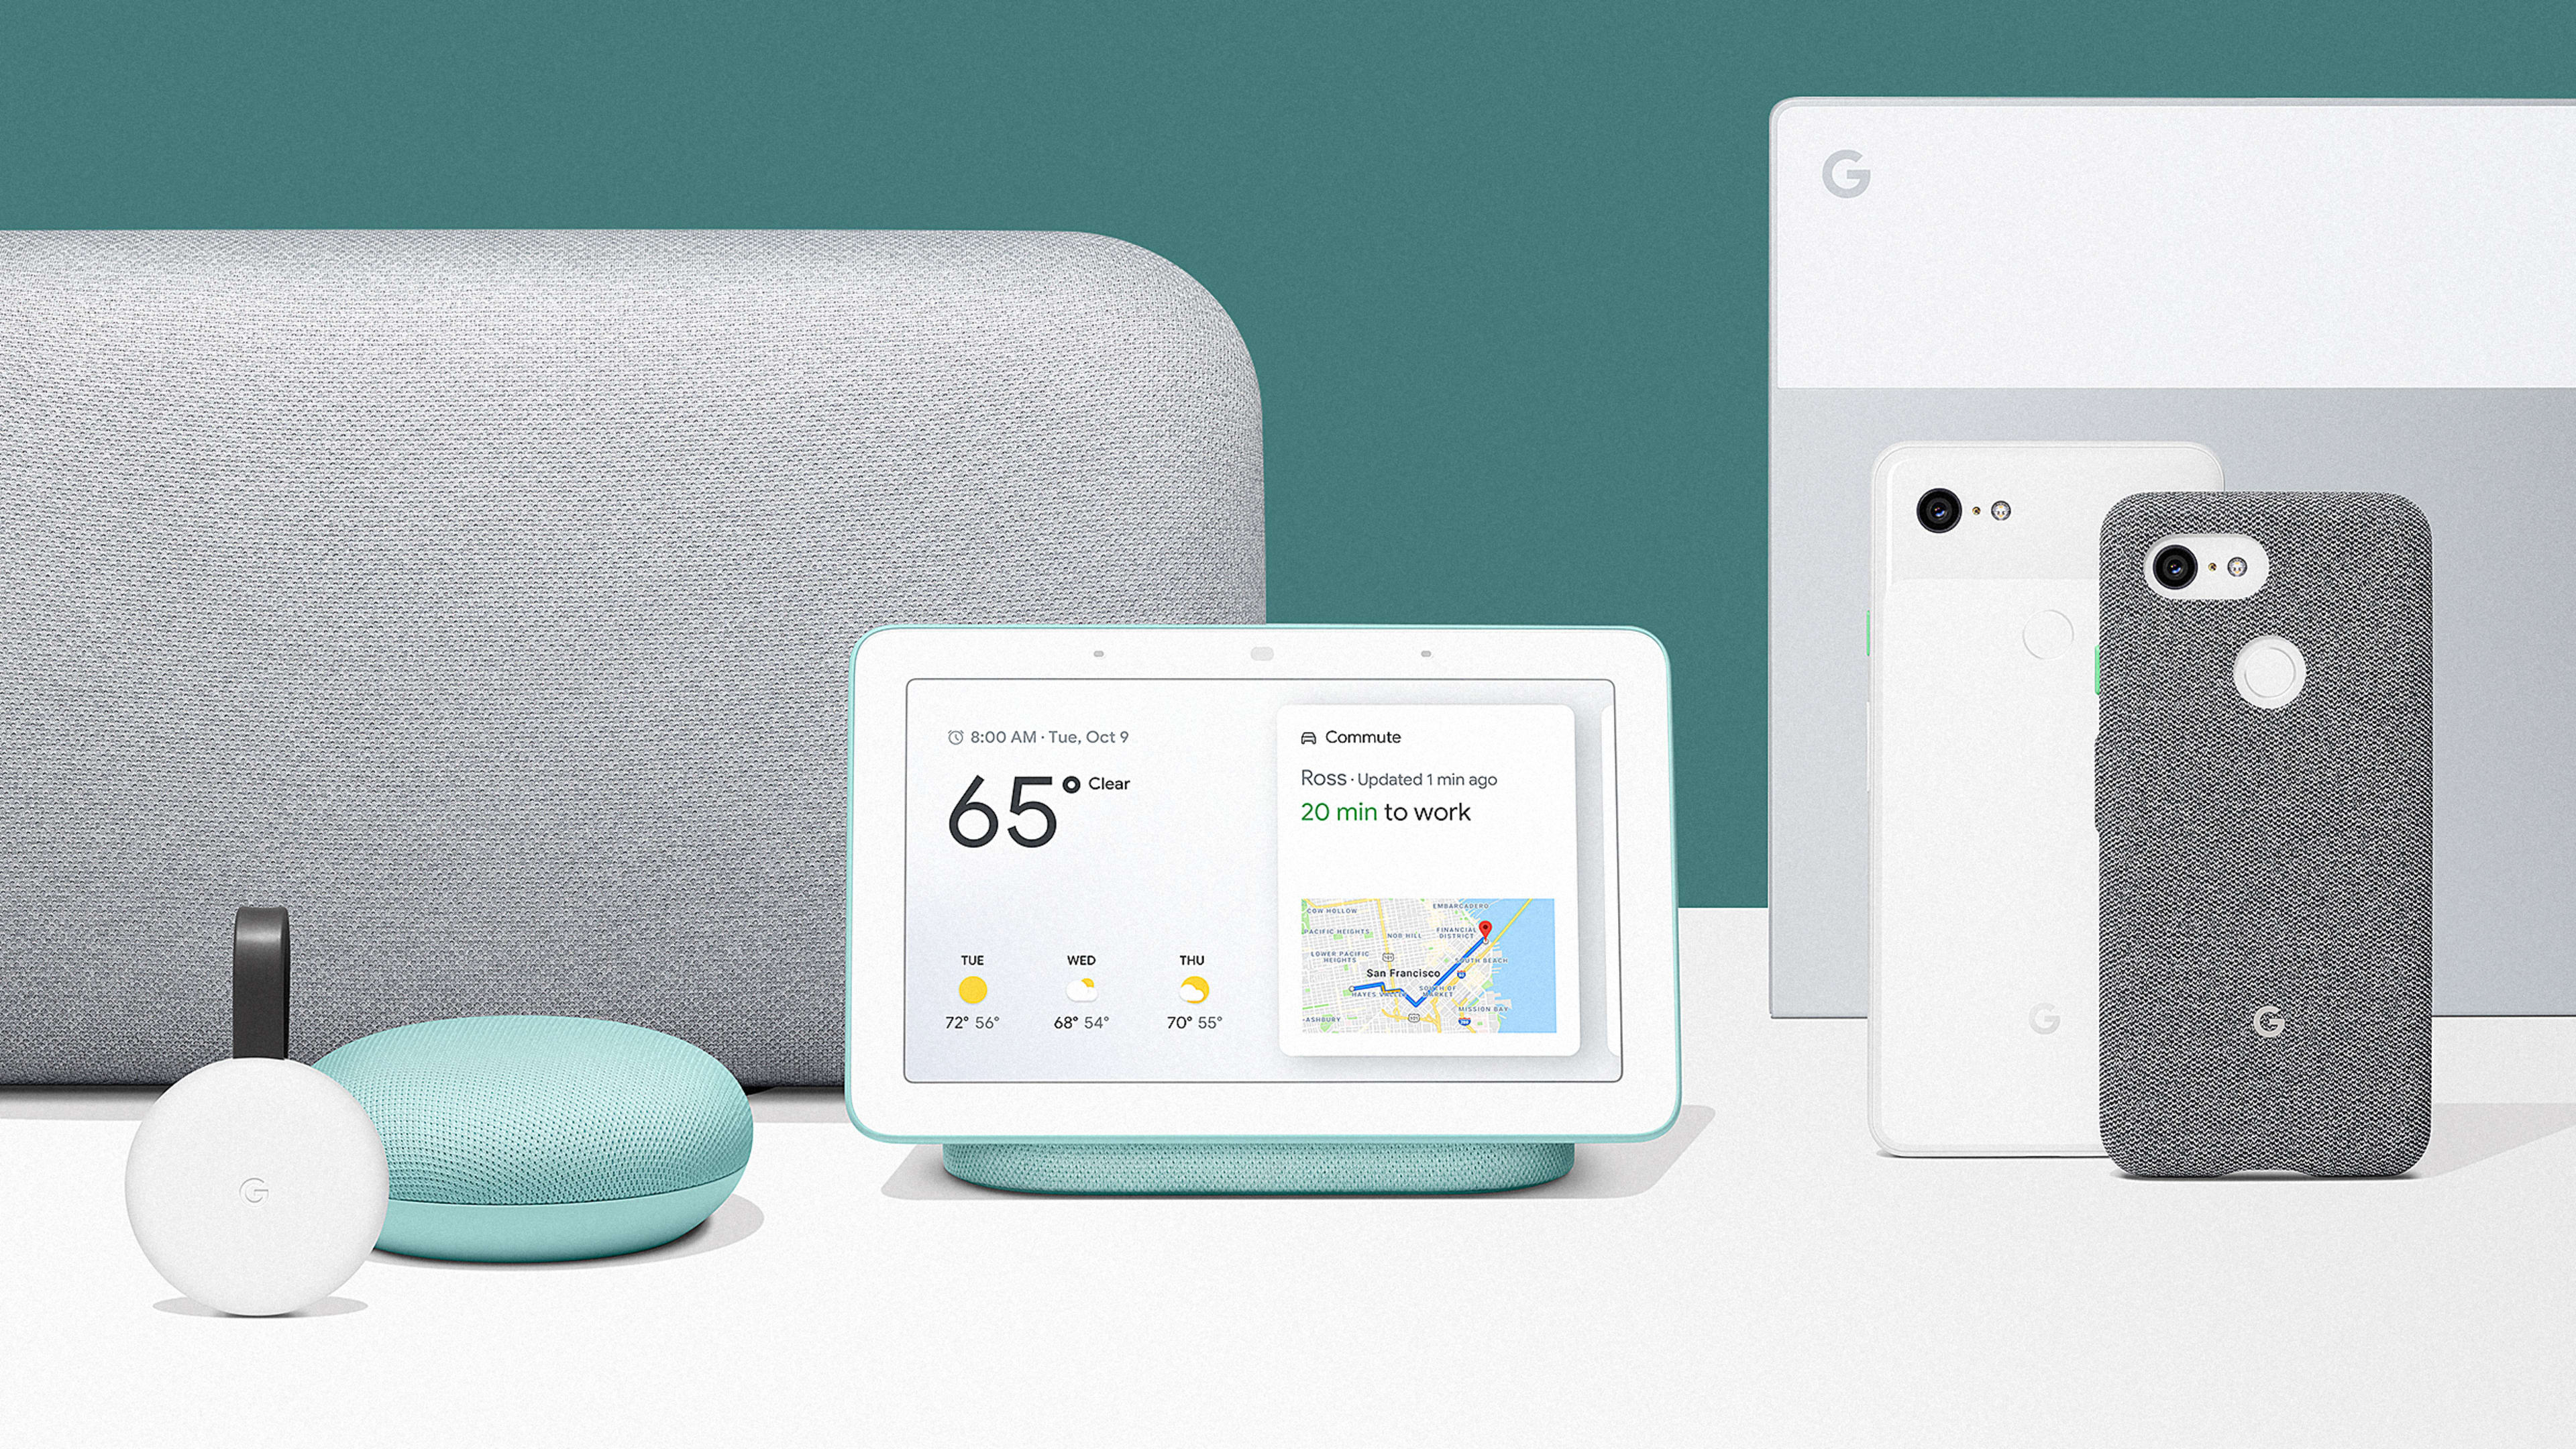 Google is making a new commitment to sustainable design